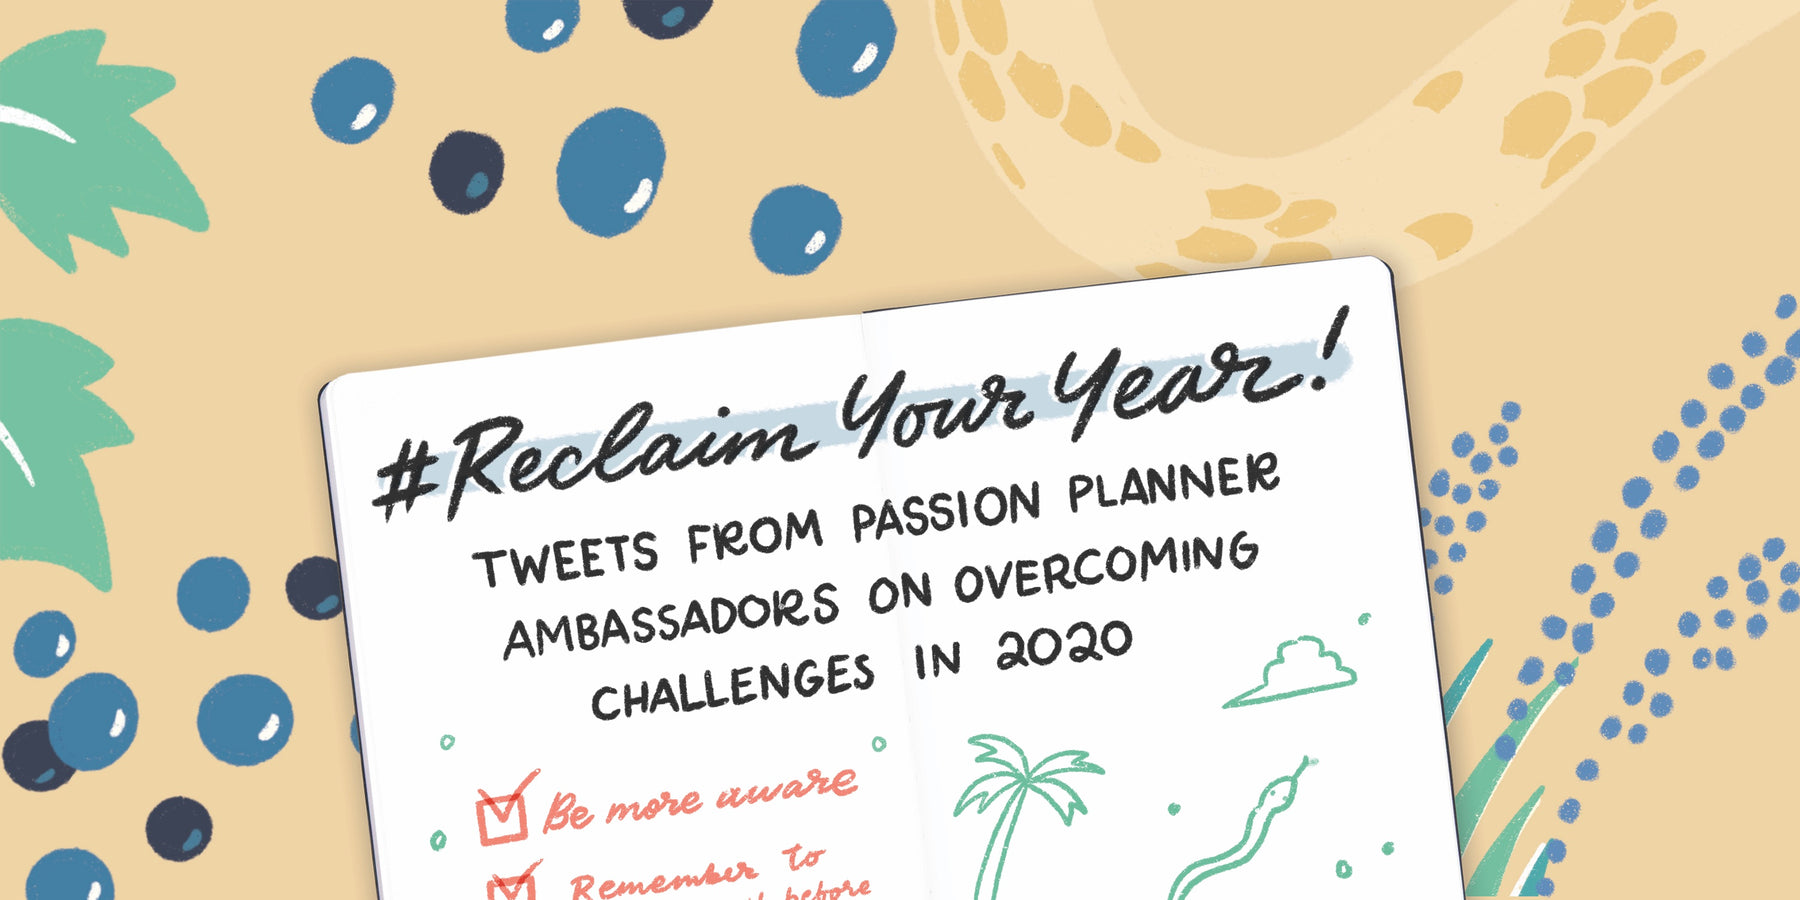 #ReclaimYourYear: 78 Inspiring Tweets from Passion Planner Ambassadors on Overcoming Challenges in 2020